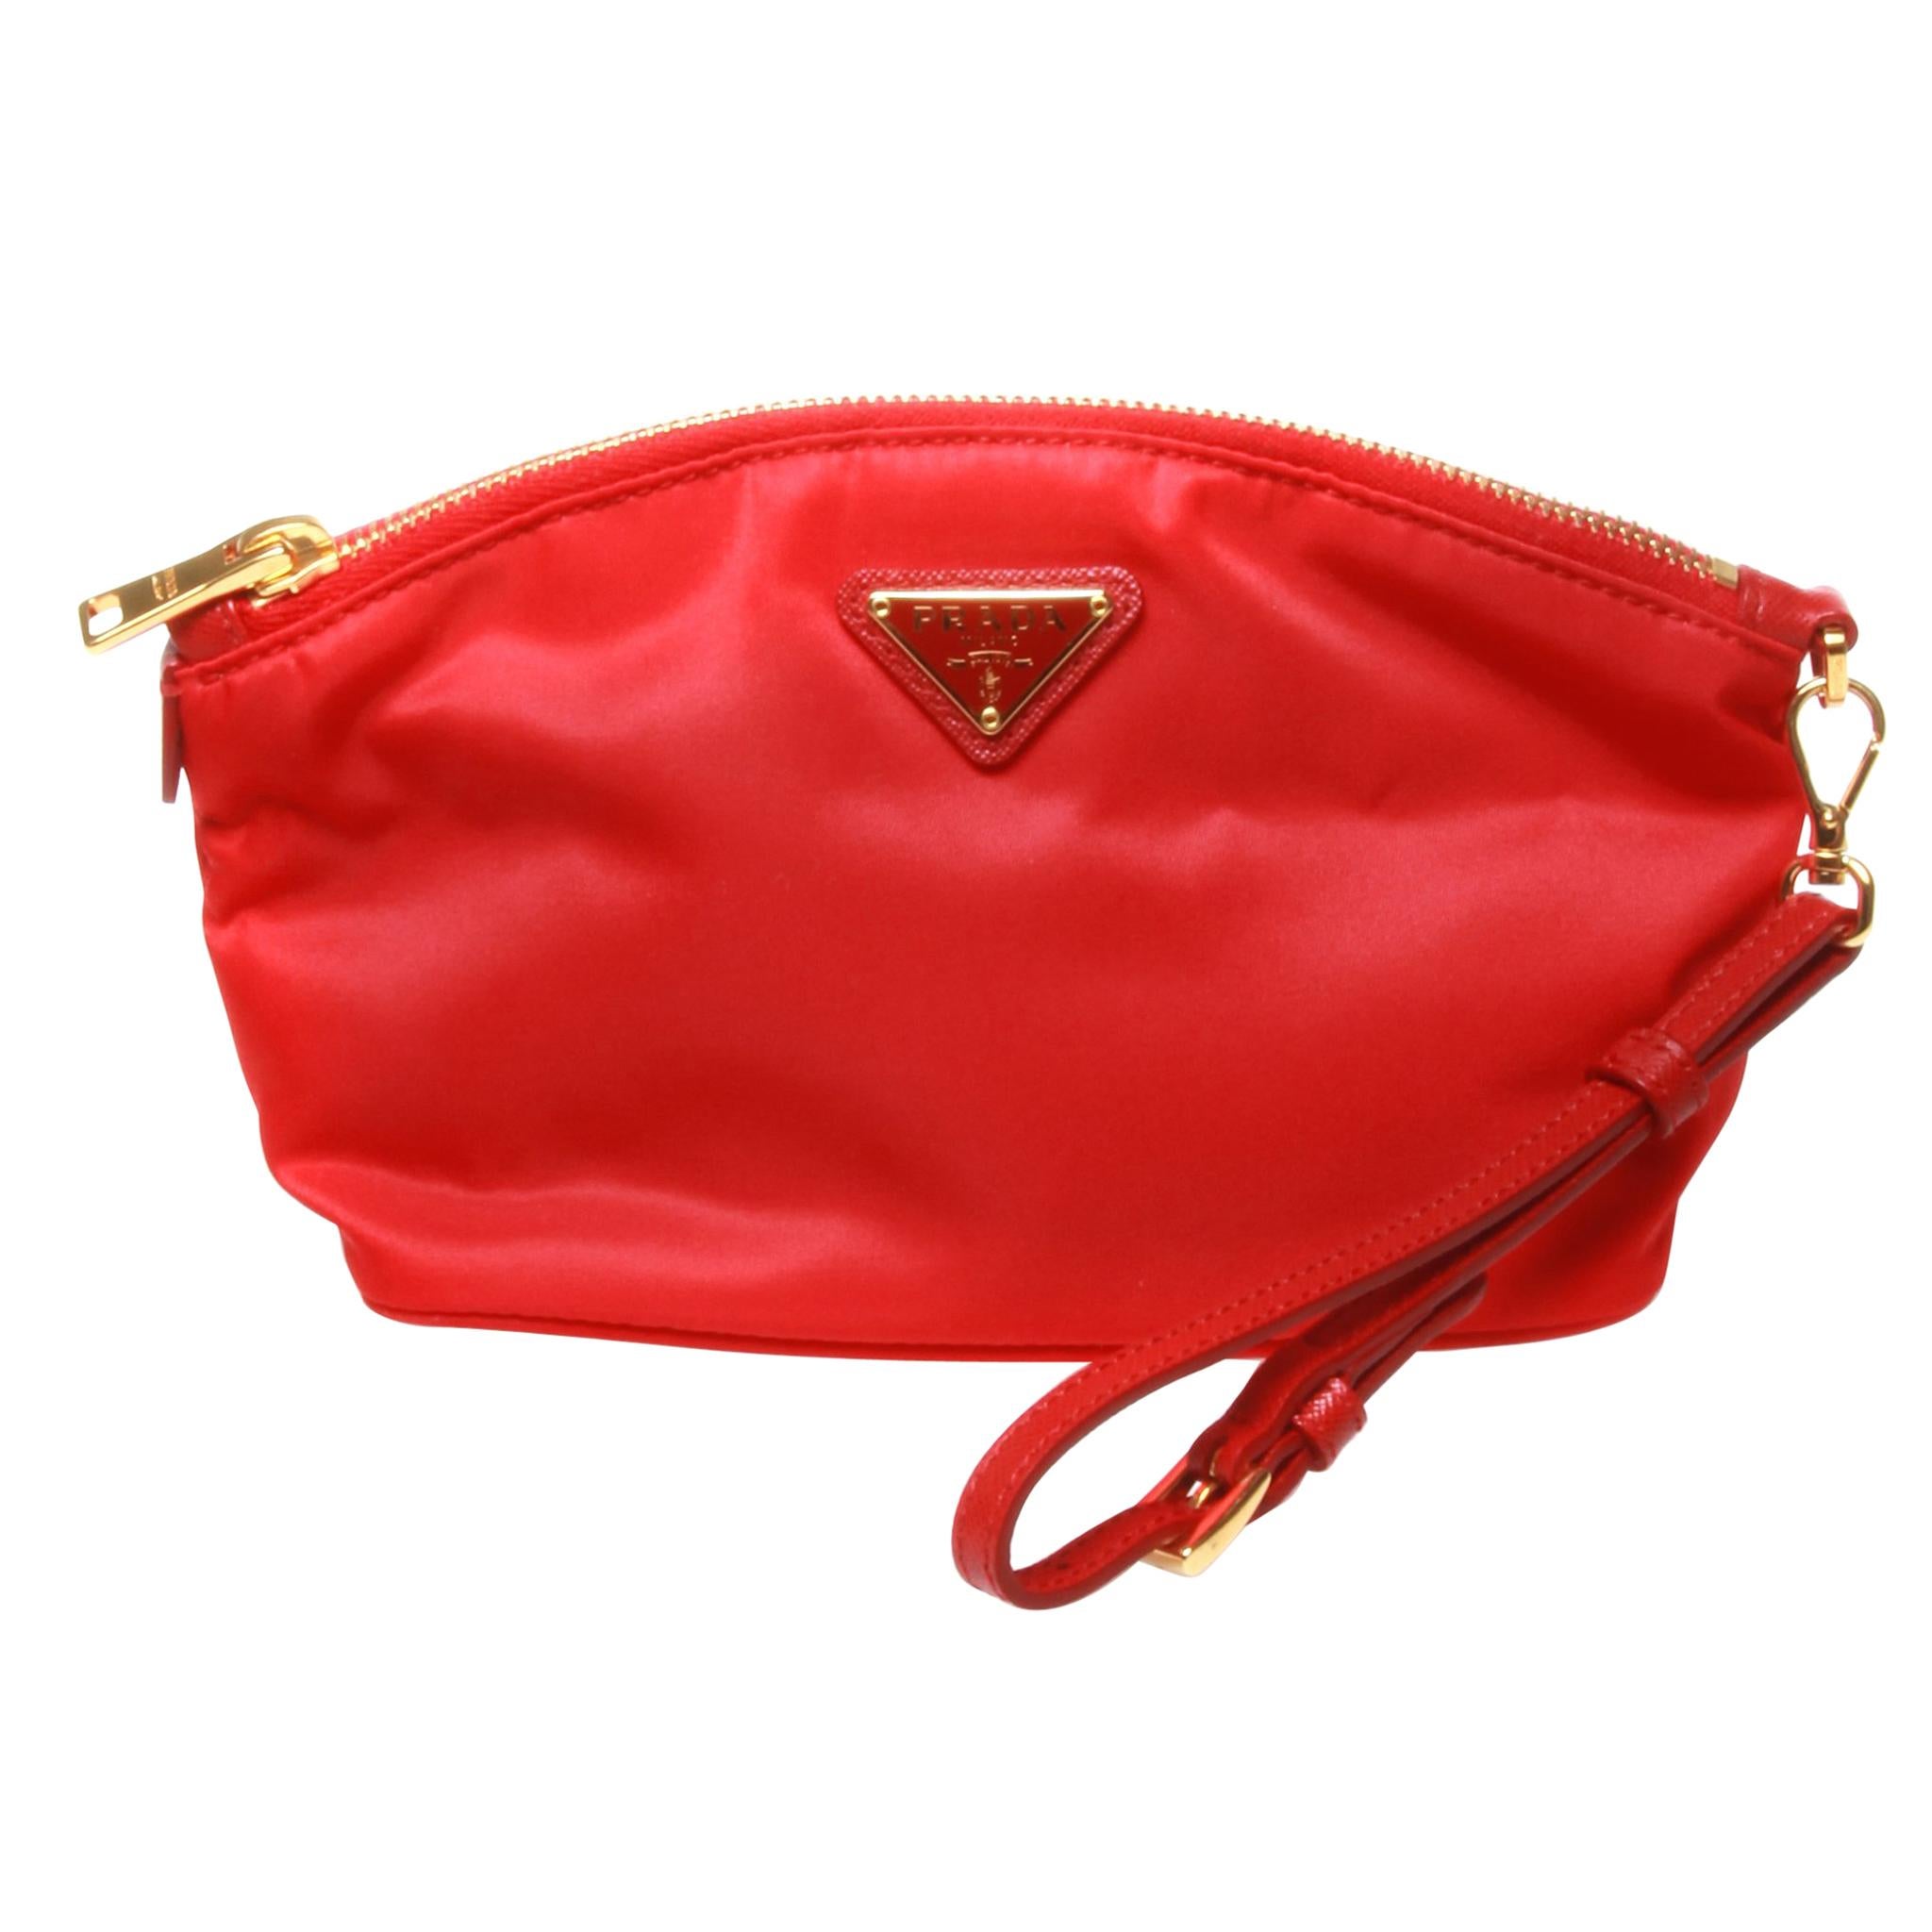 	Prada small red clutch with gold hardware and red leather strap